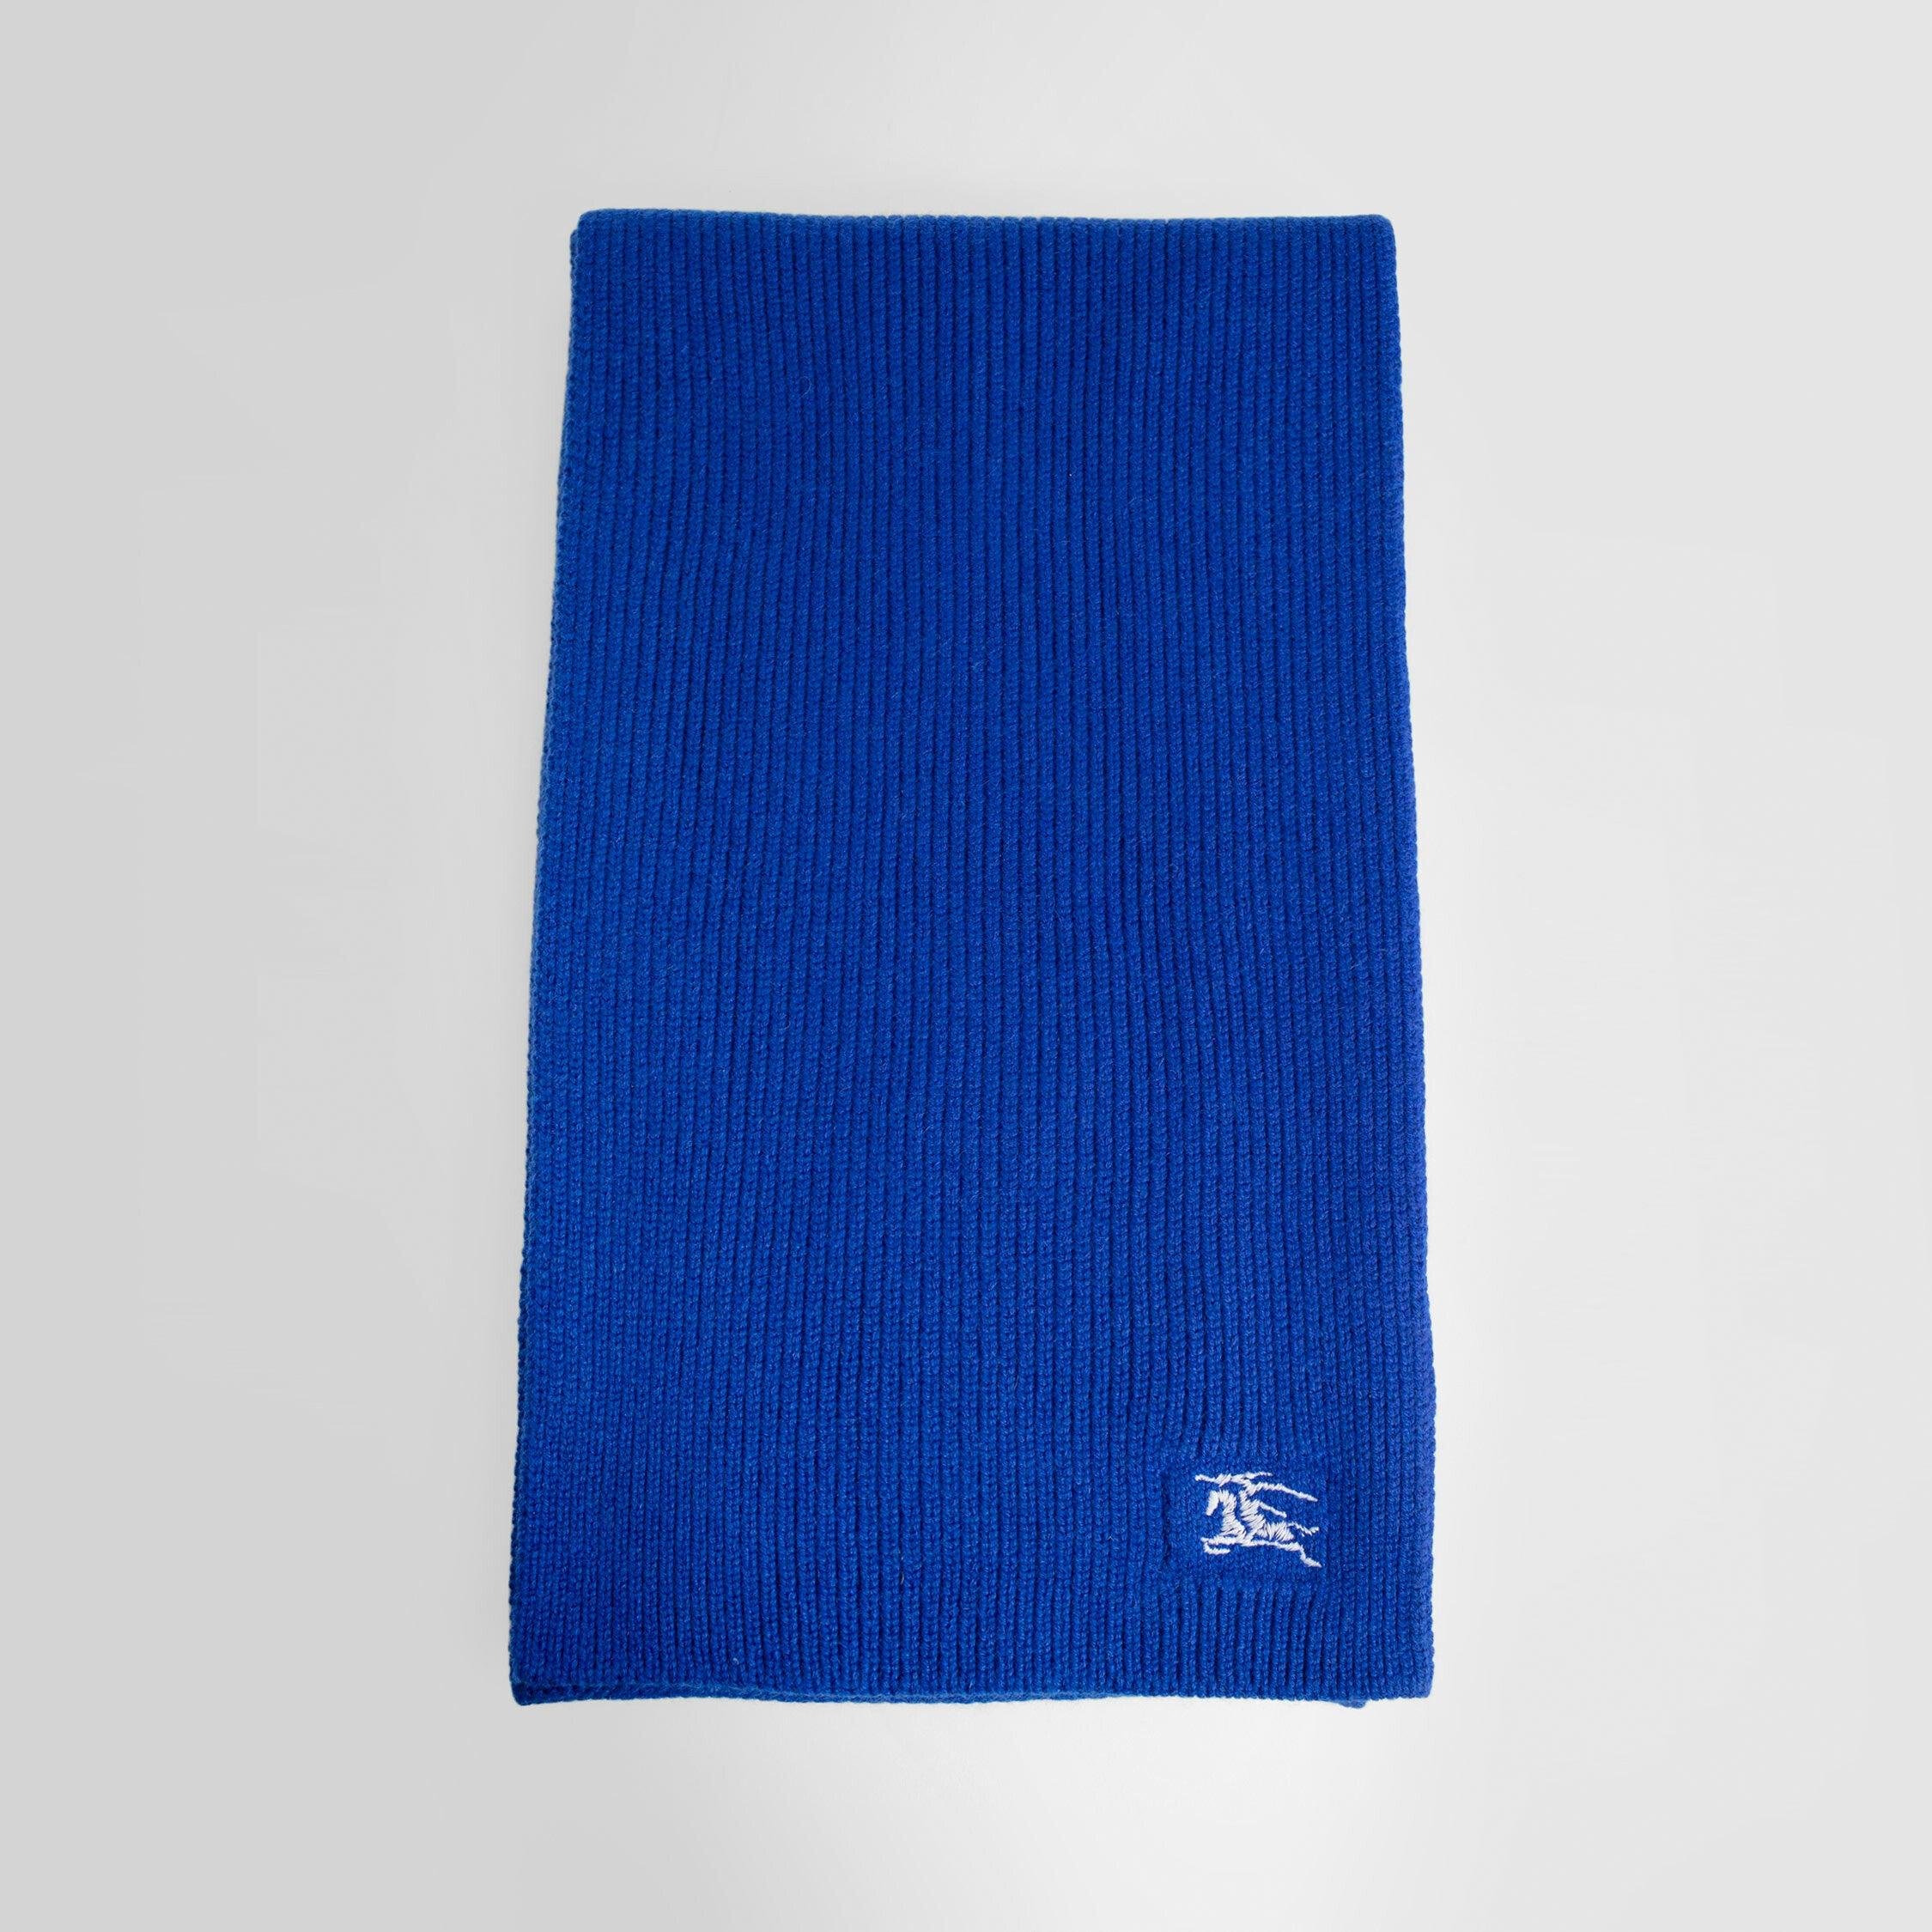 BURBERRY UNISEX BLUE SCARVES by BURBERRY